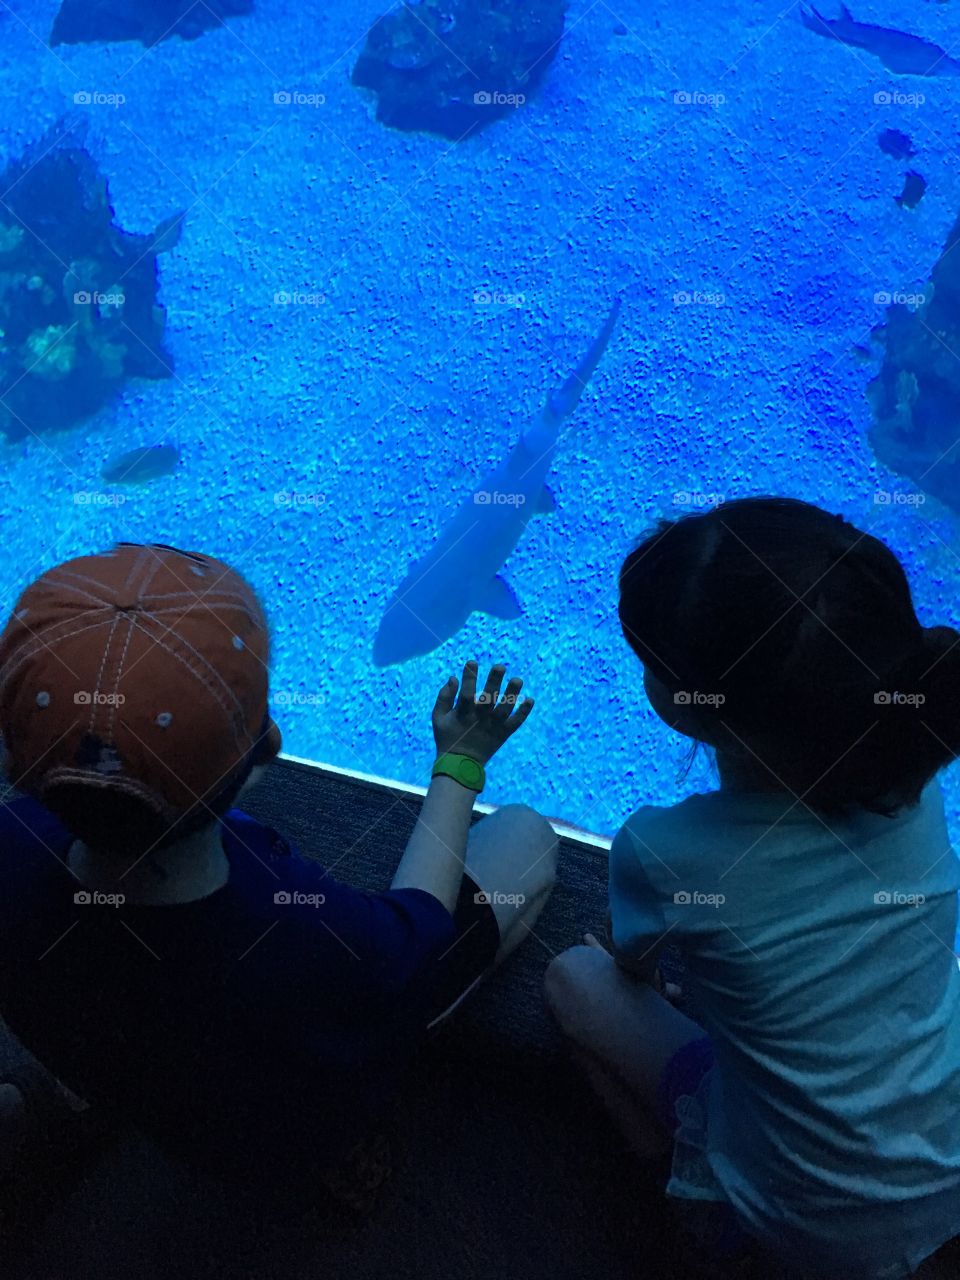 Aquarium at Epcot, Disney World. Kids fascinated by shark in the tank. 